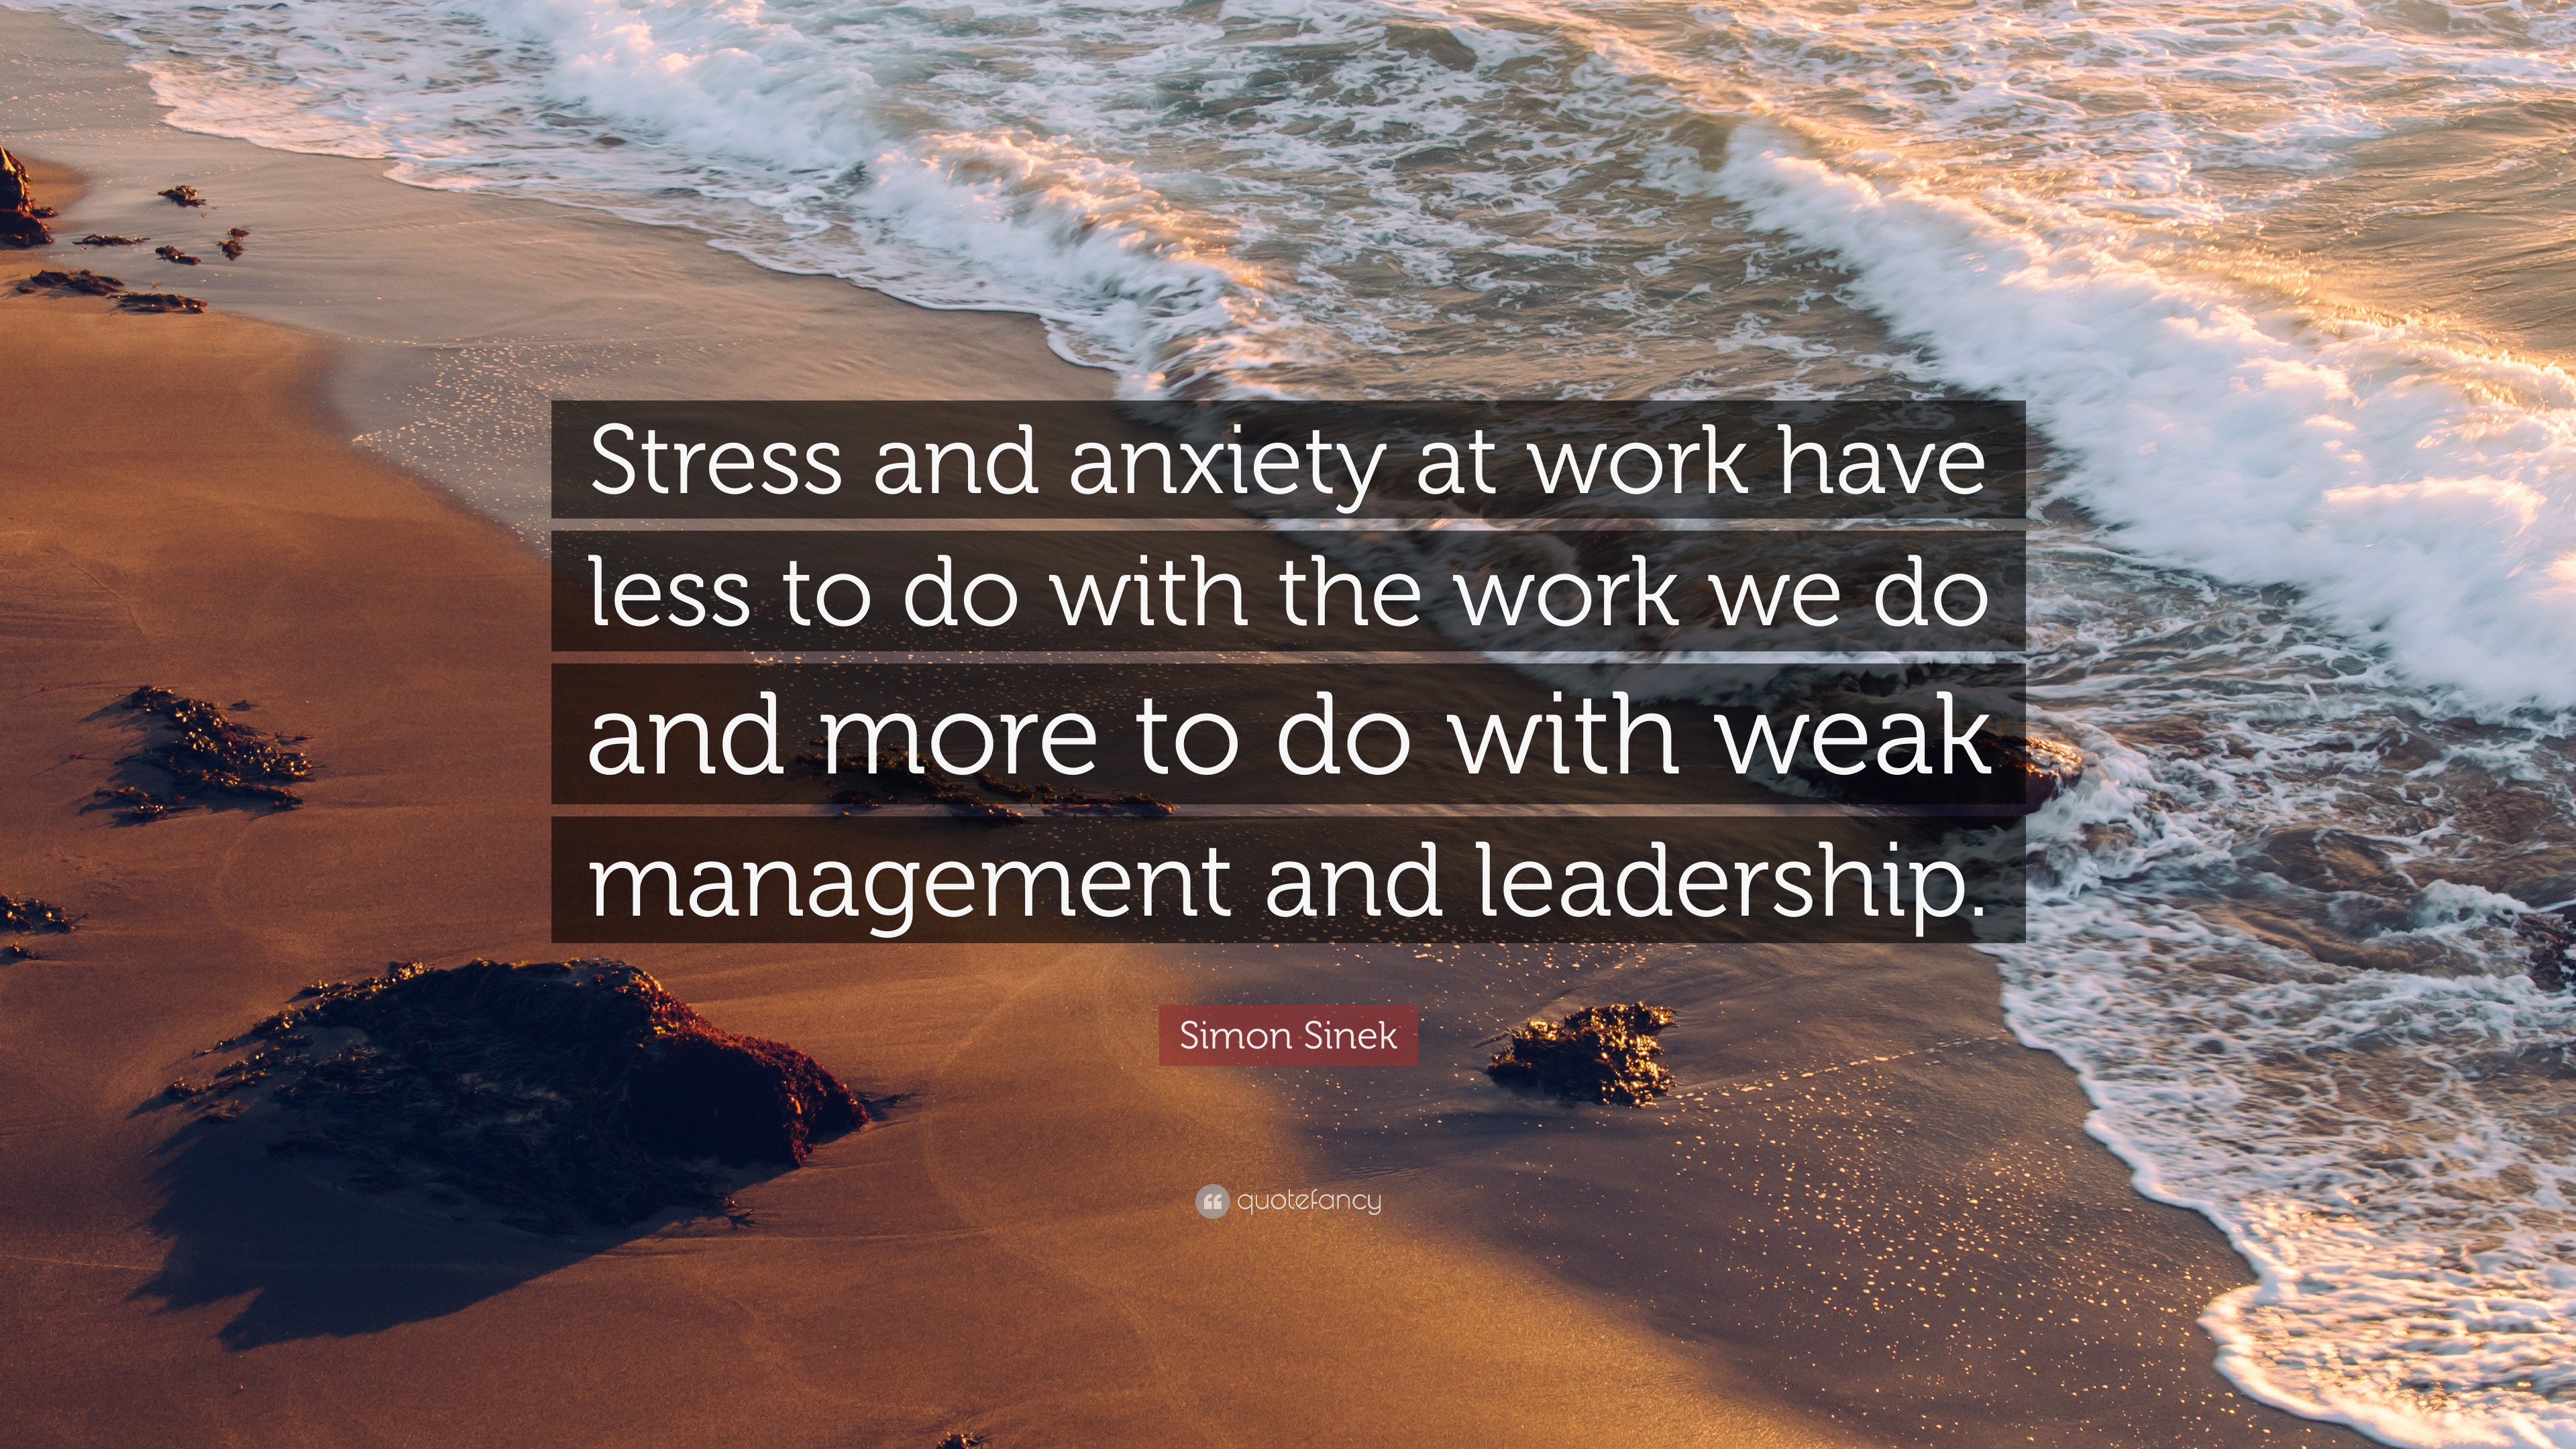 Simon Sinek Quote: “Stress and anxiety at work have less to do with the